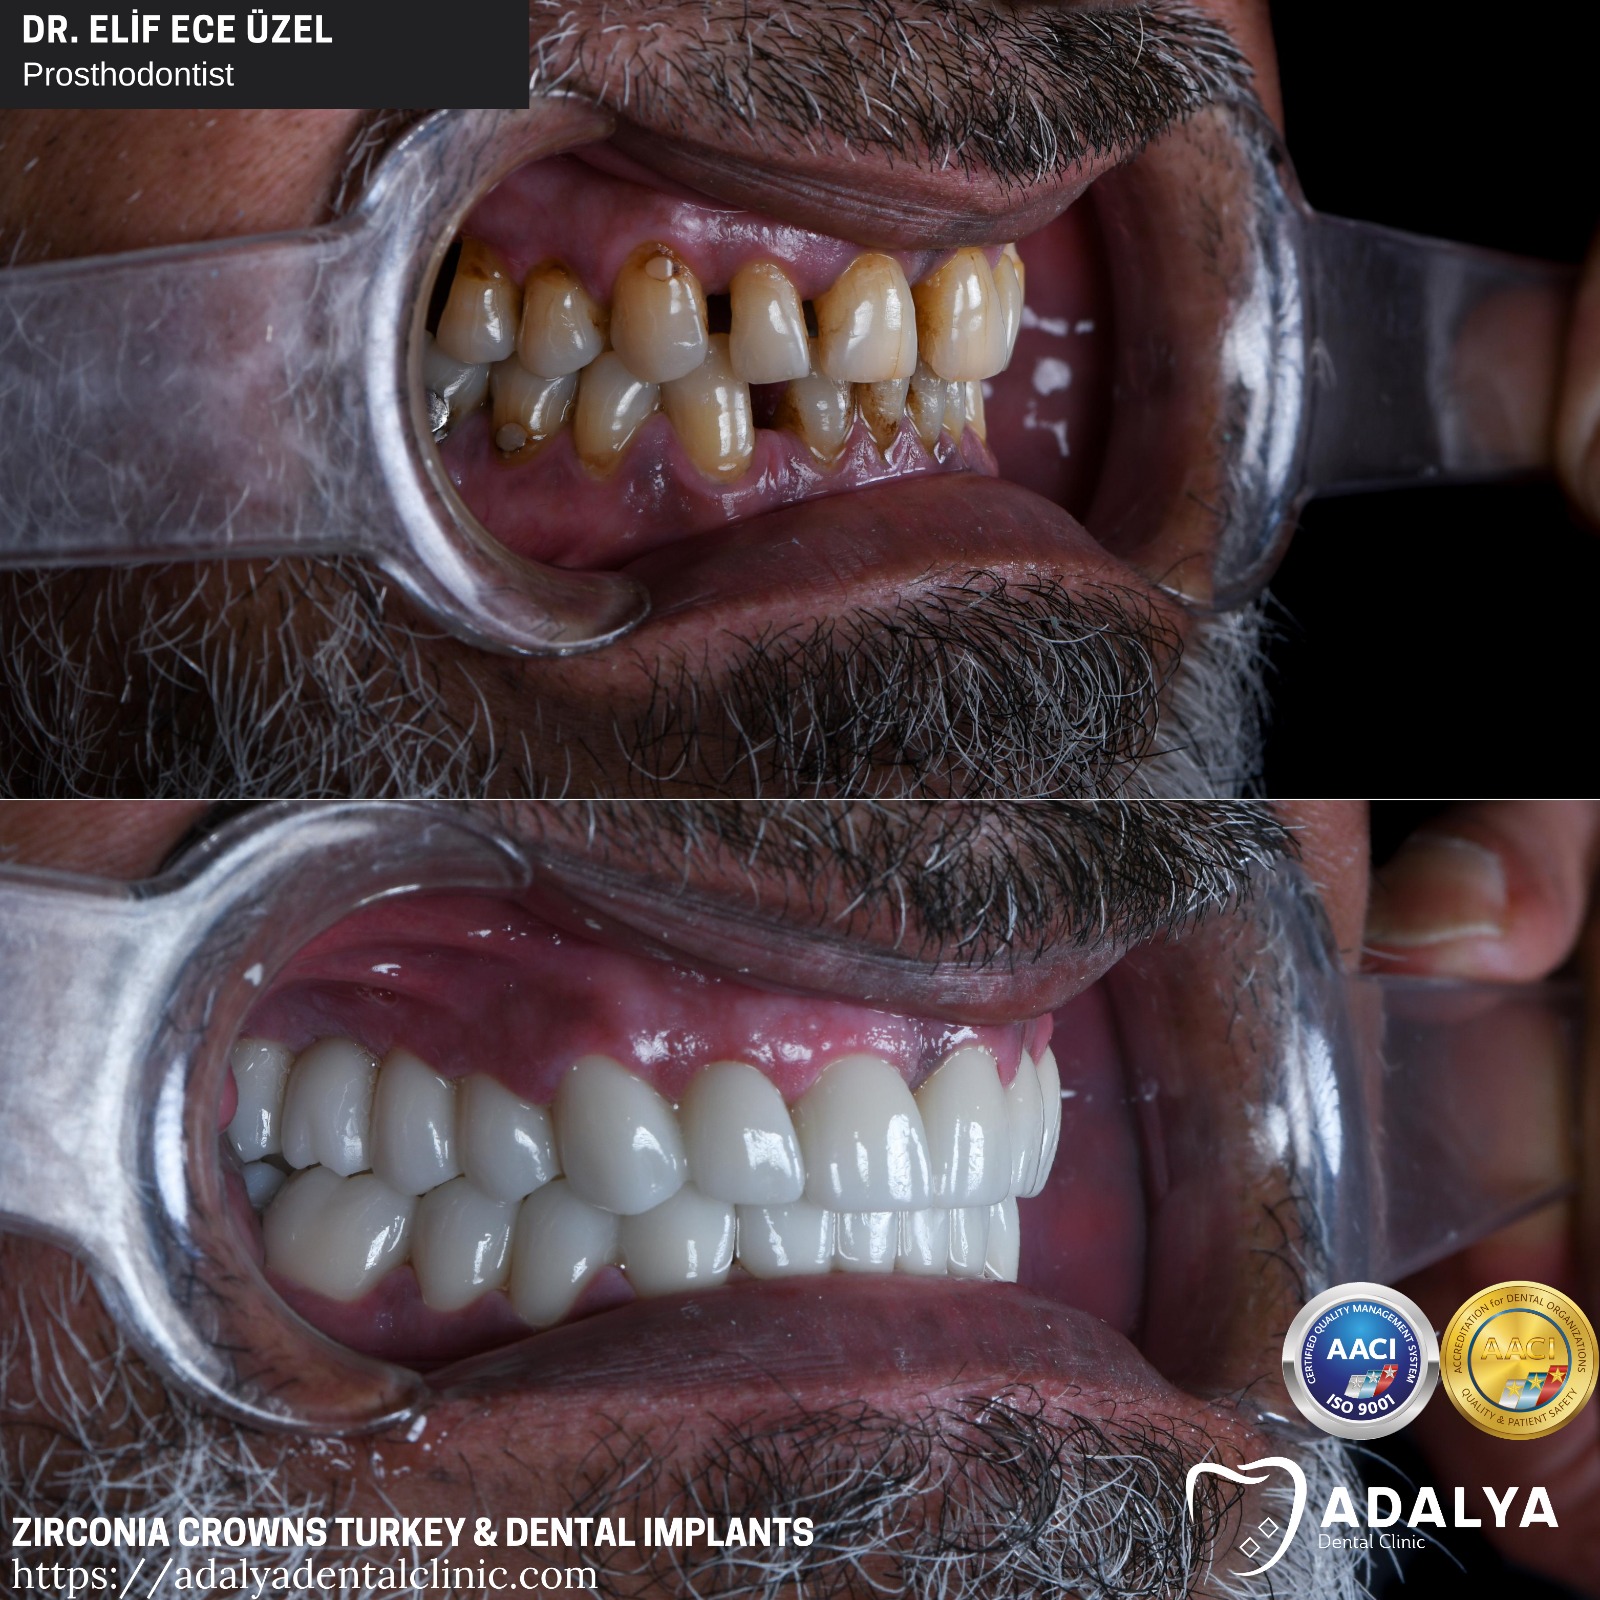 dental clinic turkey antalya zirconia crowns tooth implants cost packages price